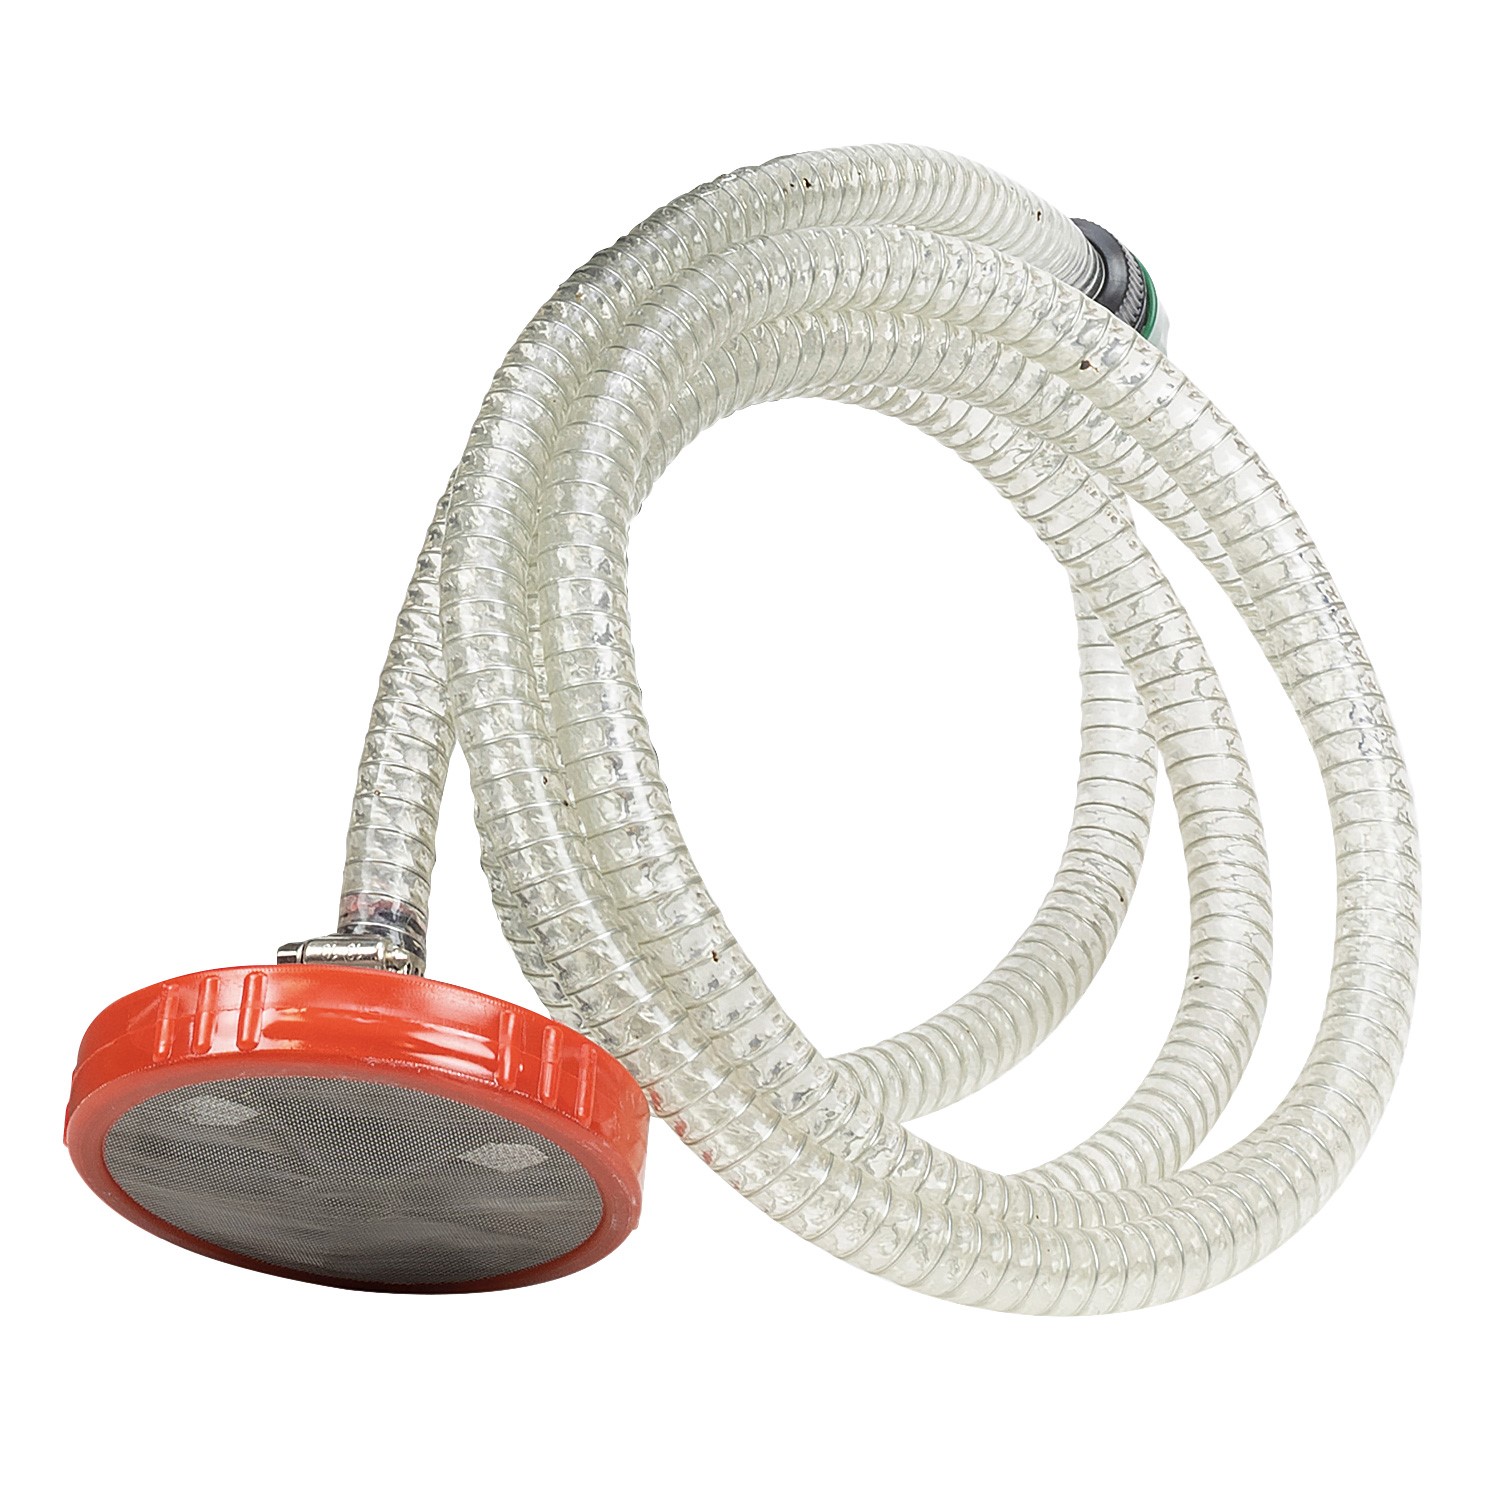 2mtr water suction with hose and filter strainer head included